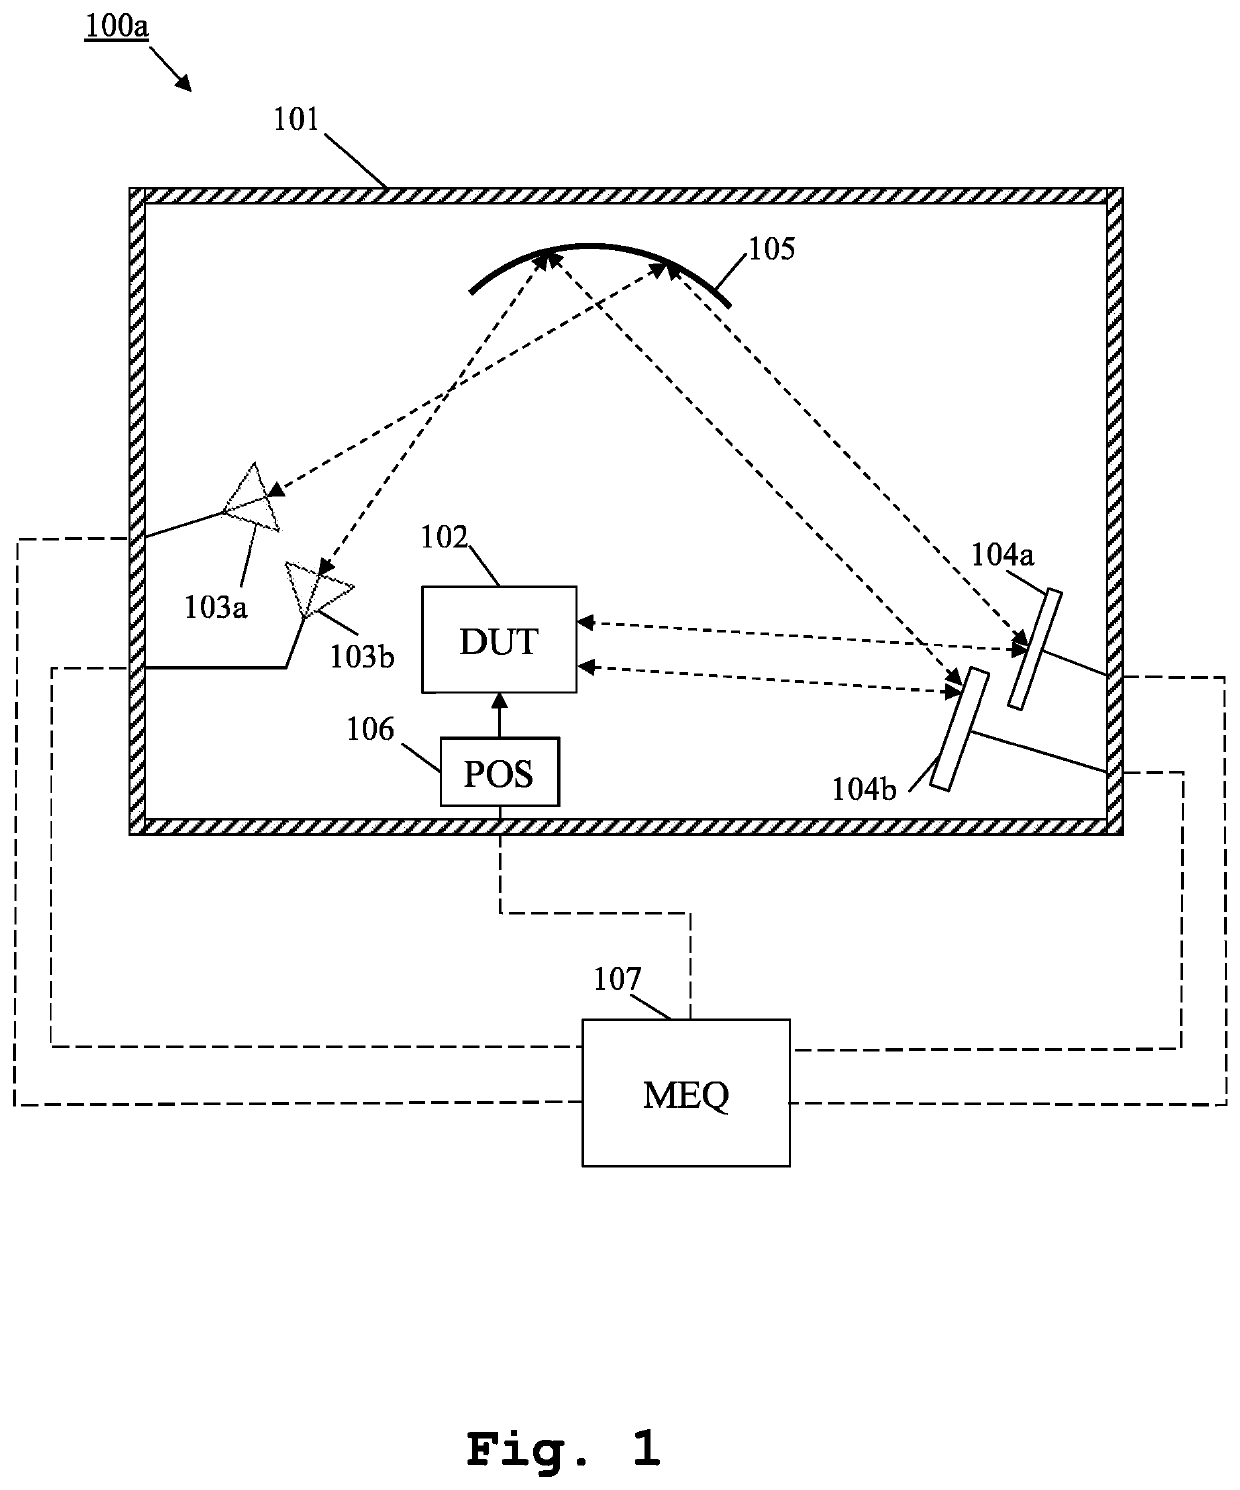 Measurement system and method for multiple antenna measurements with different angles of arrival